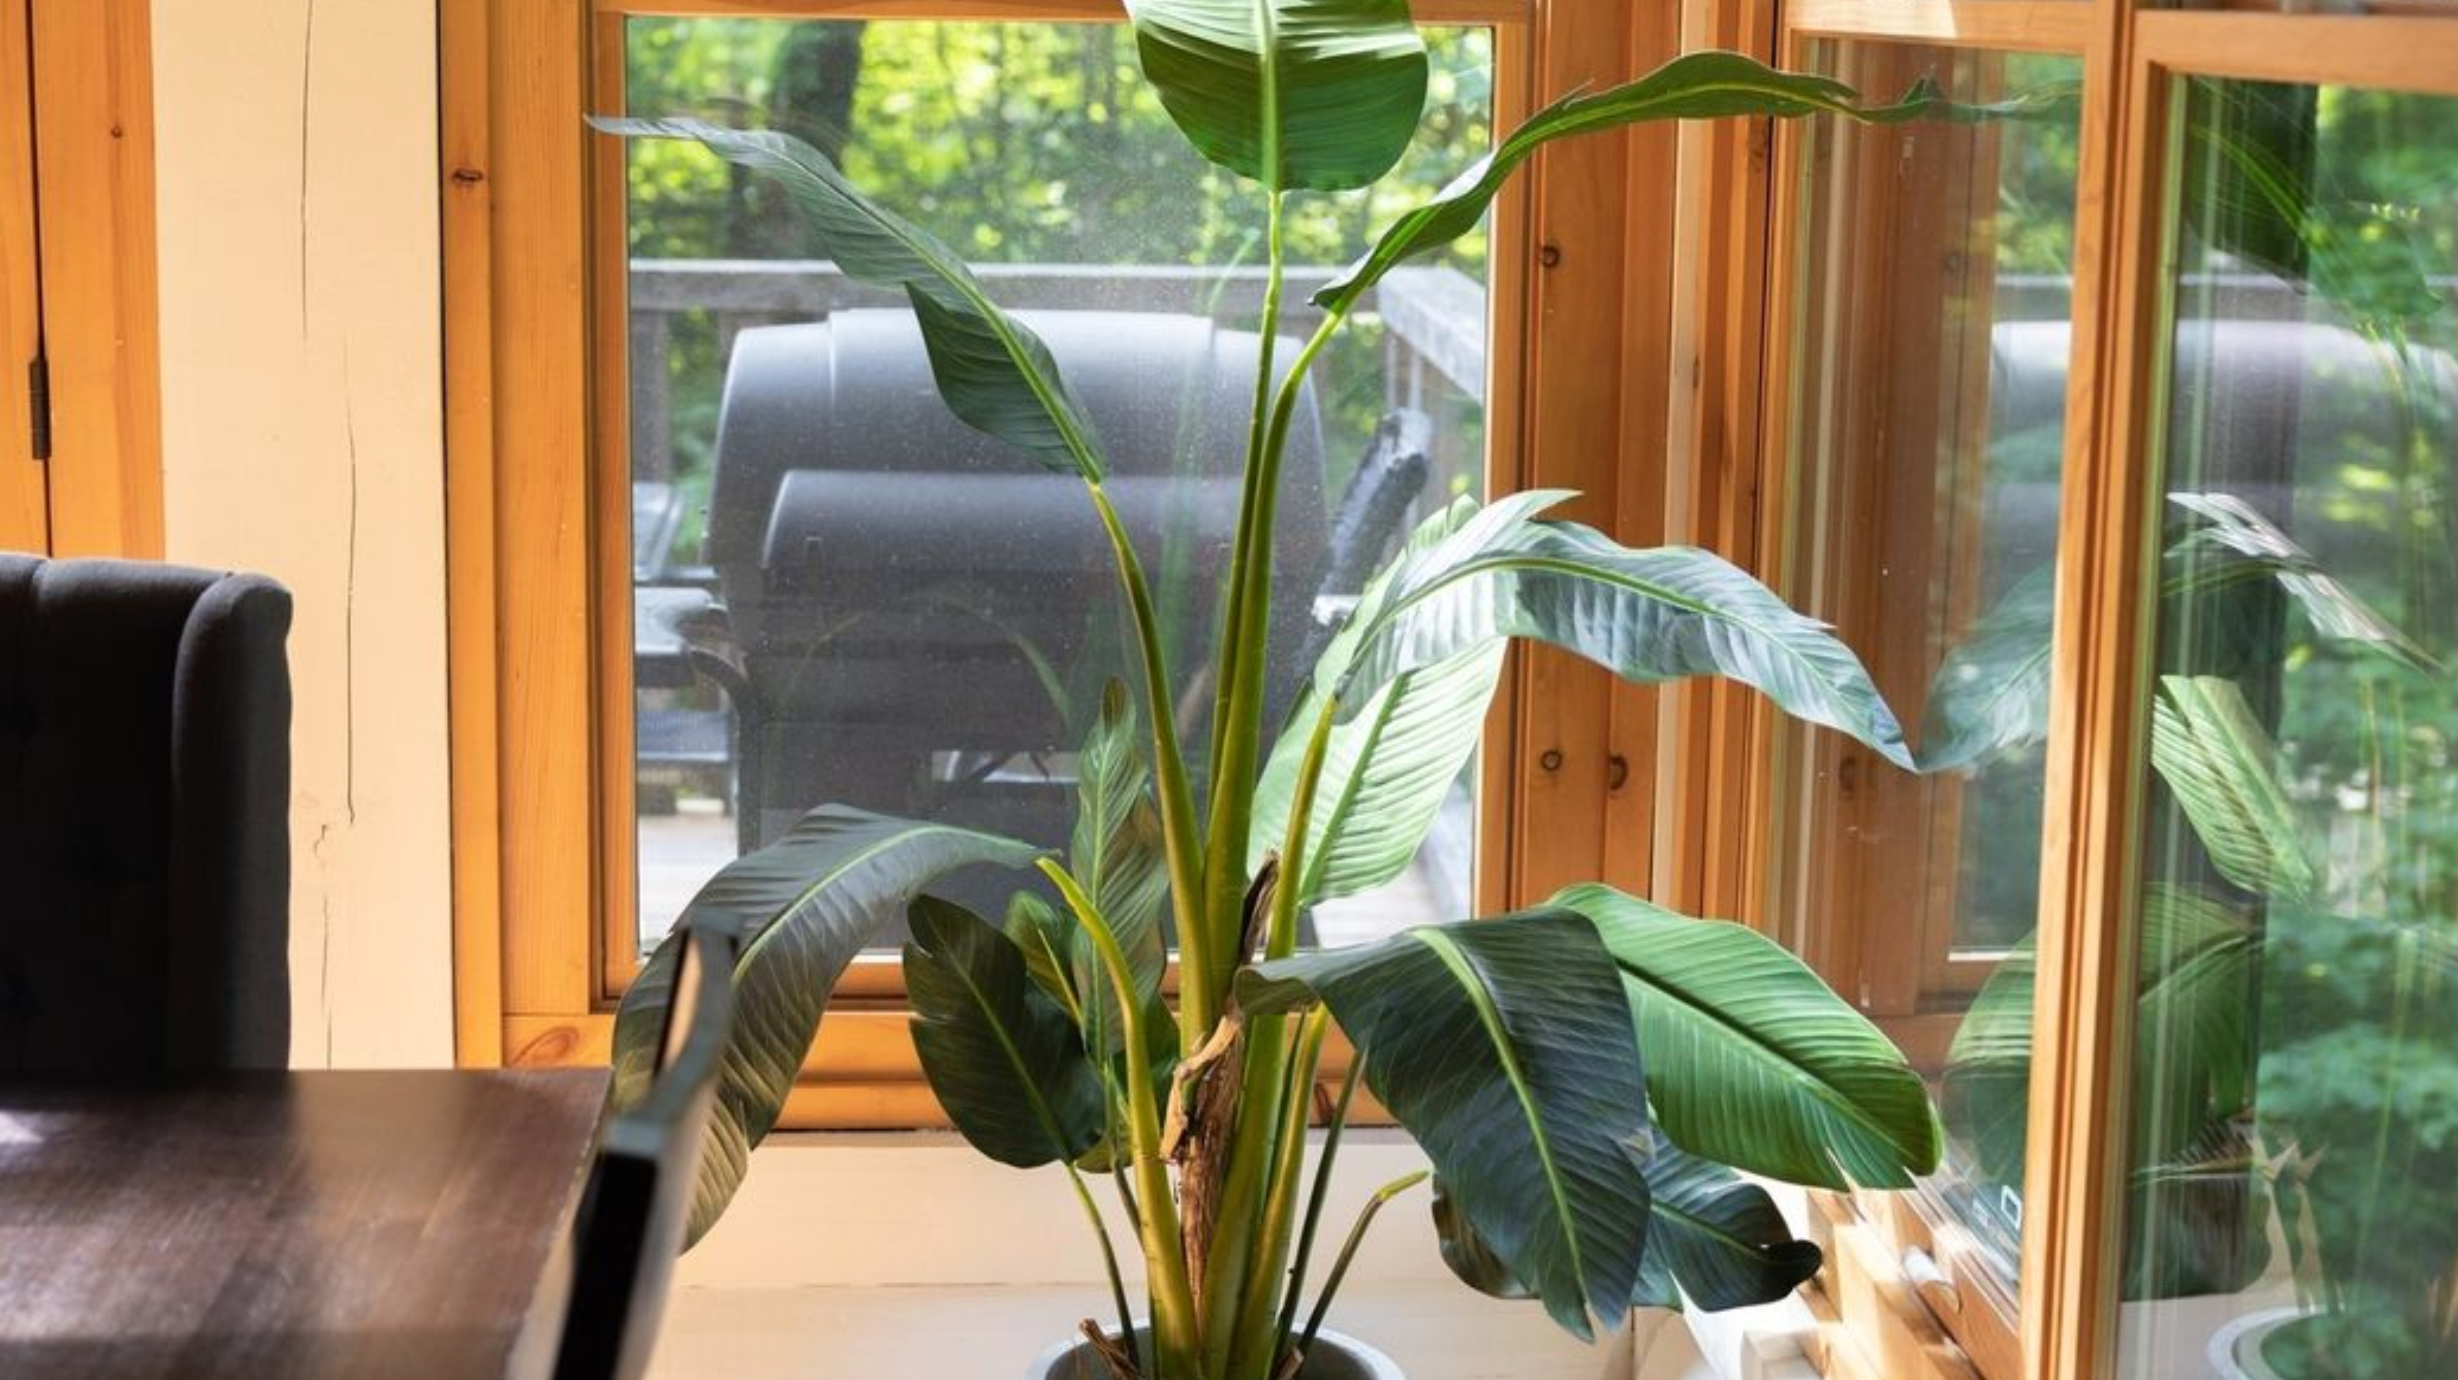 5 Things To Consider When Buying An Indoor Artificial Plant This Winter